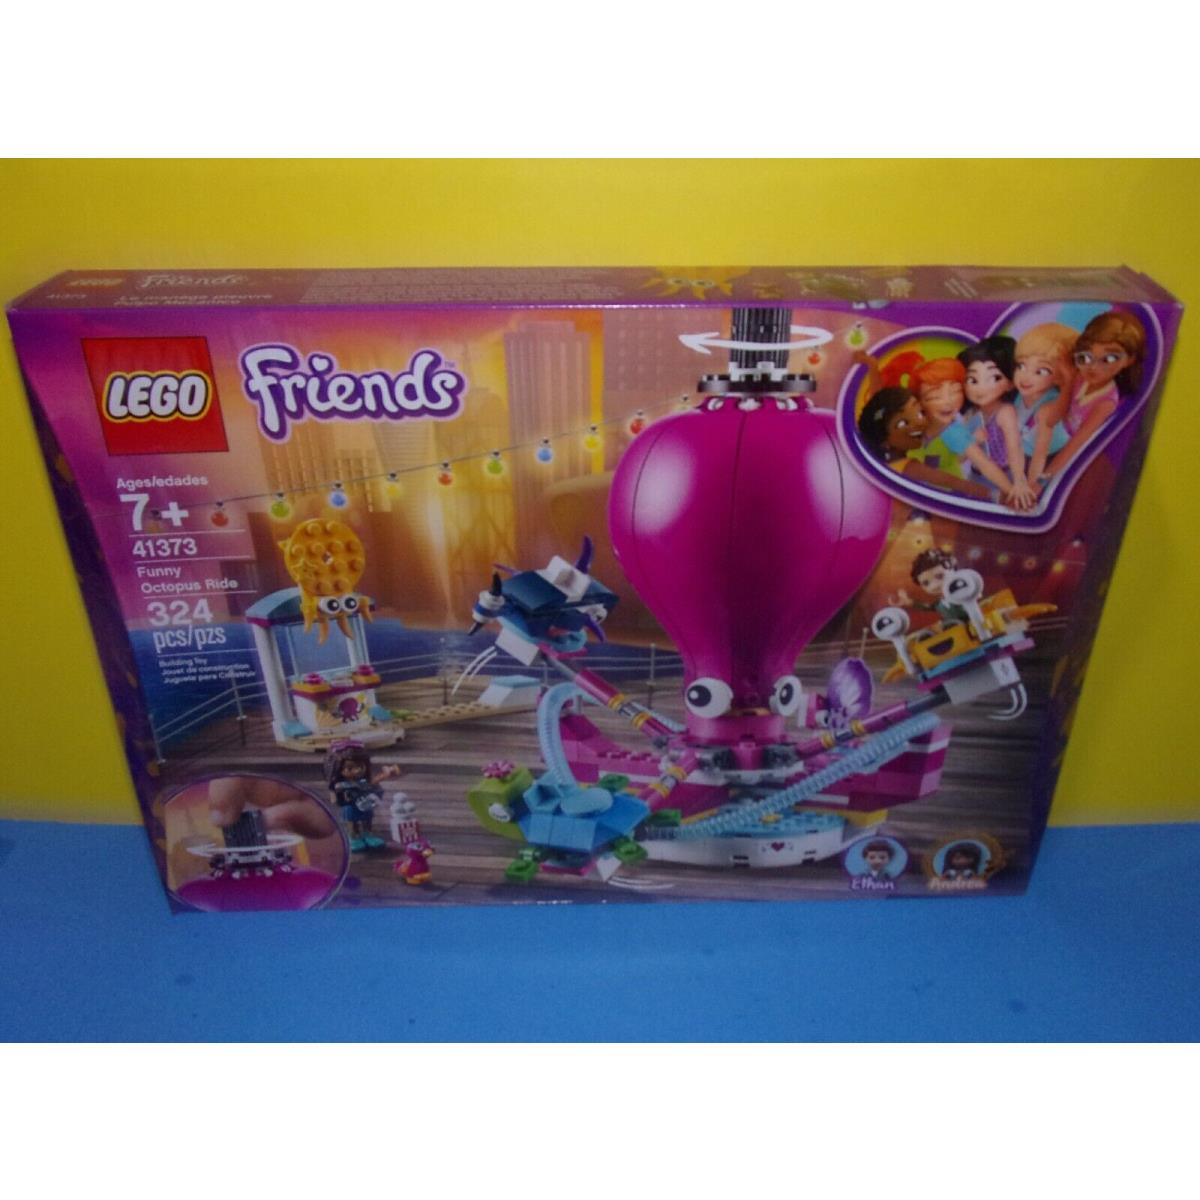 Lego Friends Funny Octopus Ride Set 41373 with Ethan Andrea